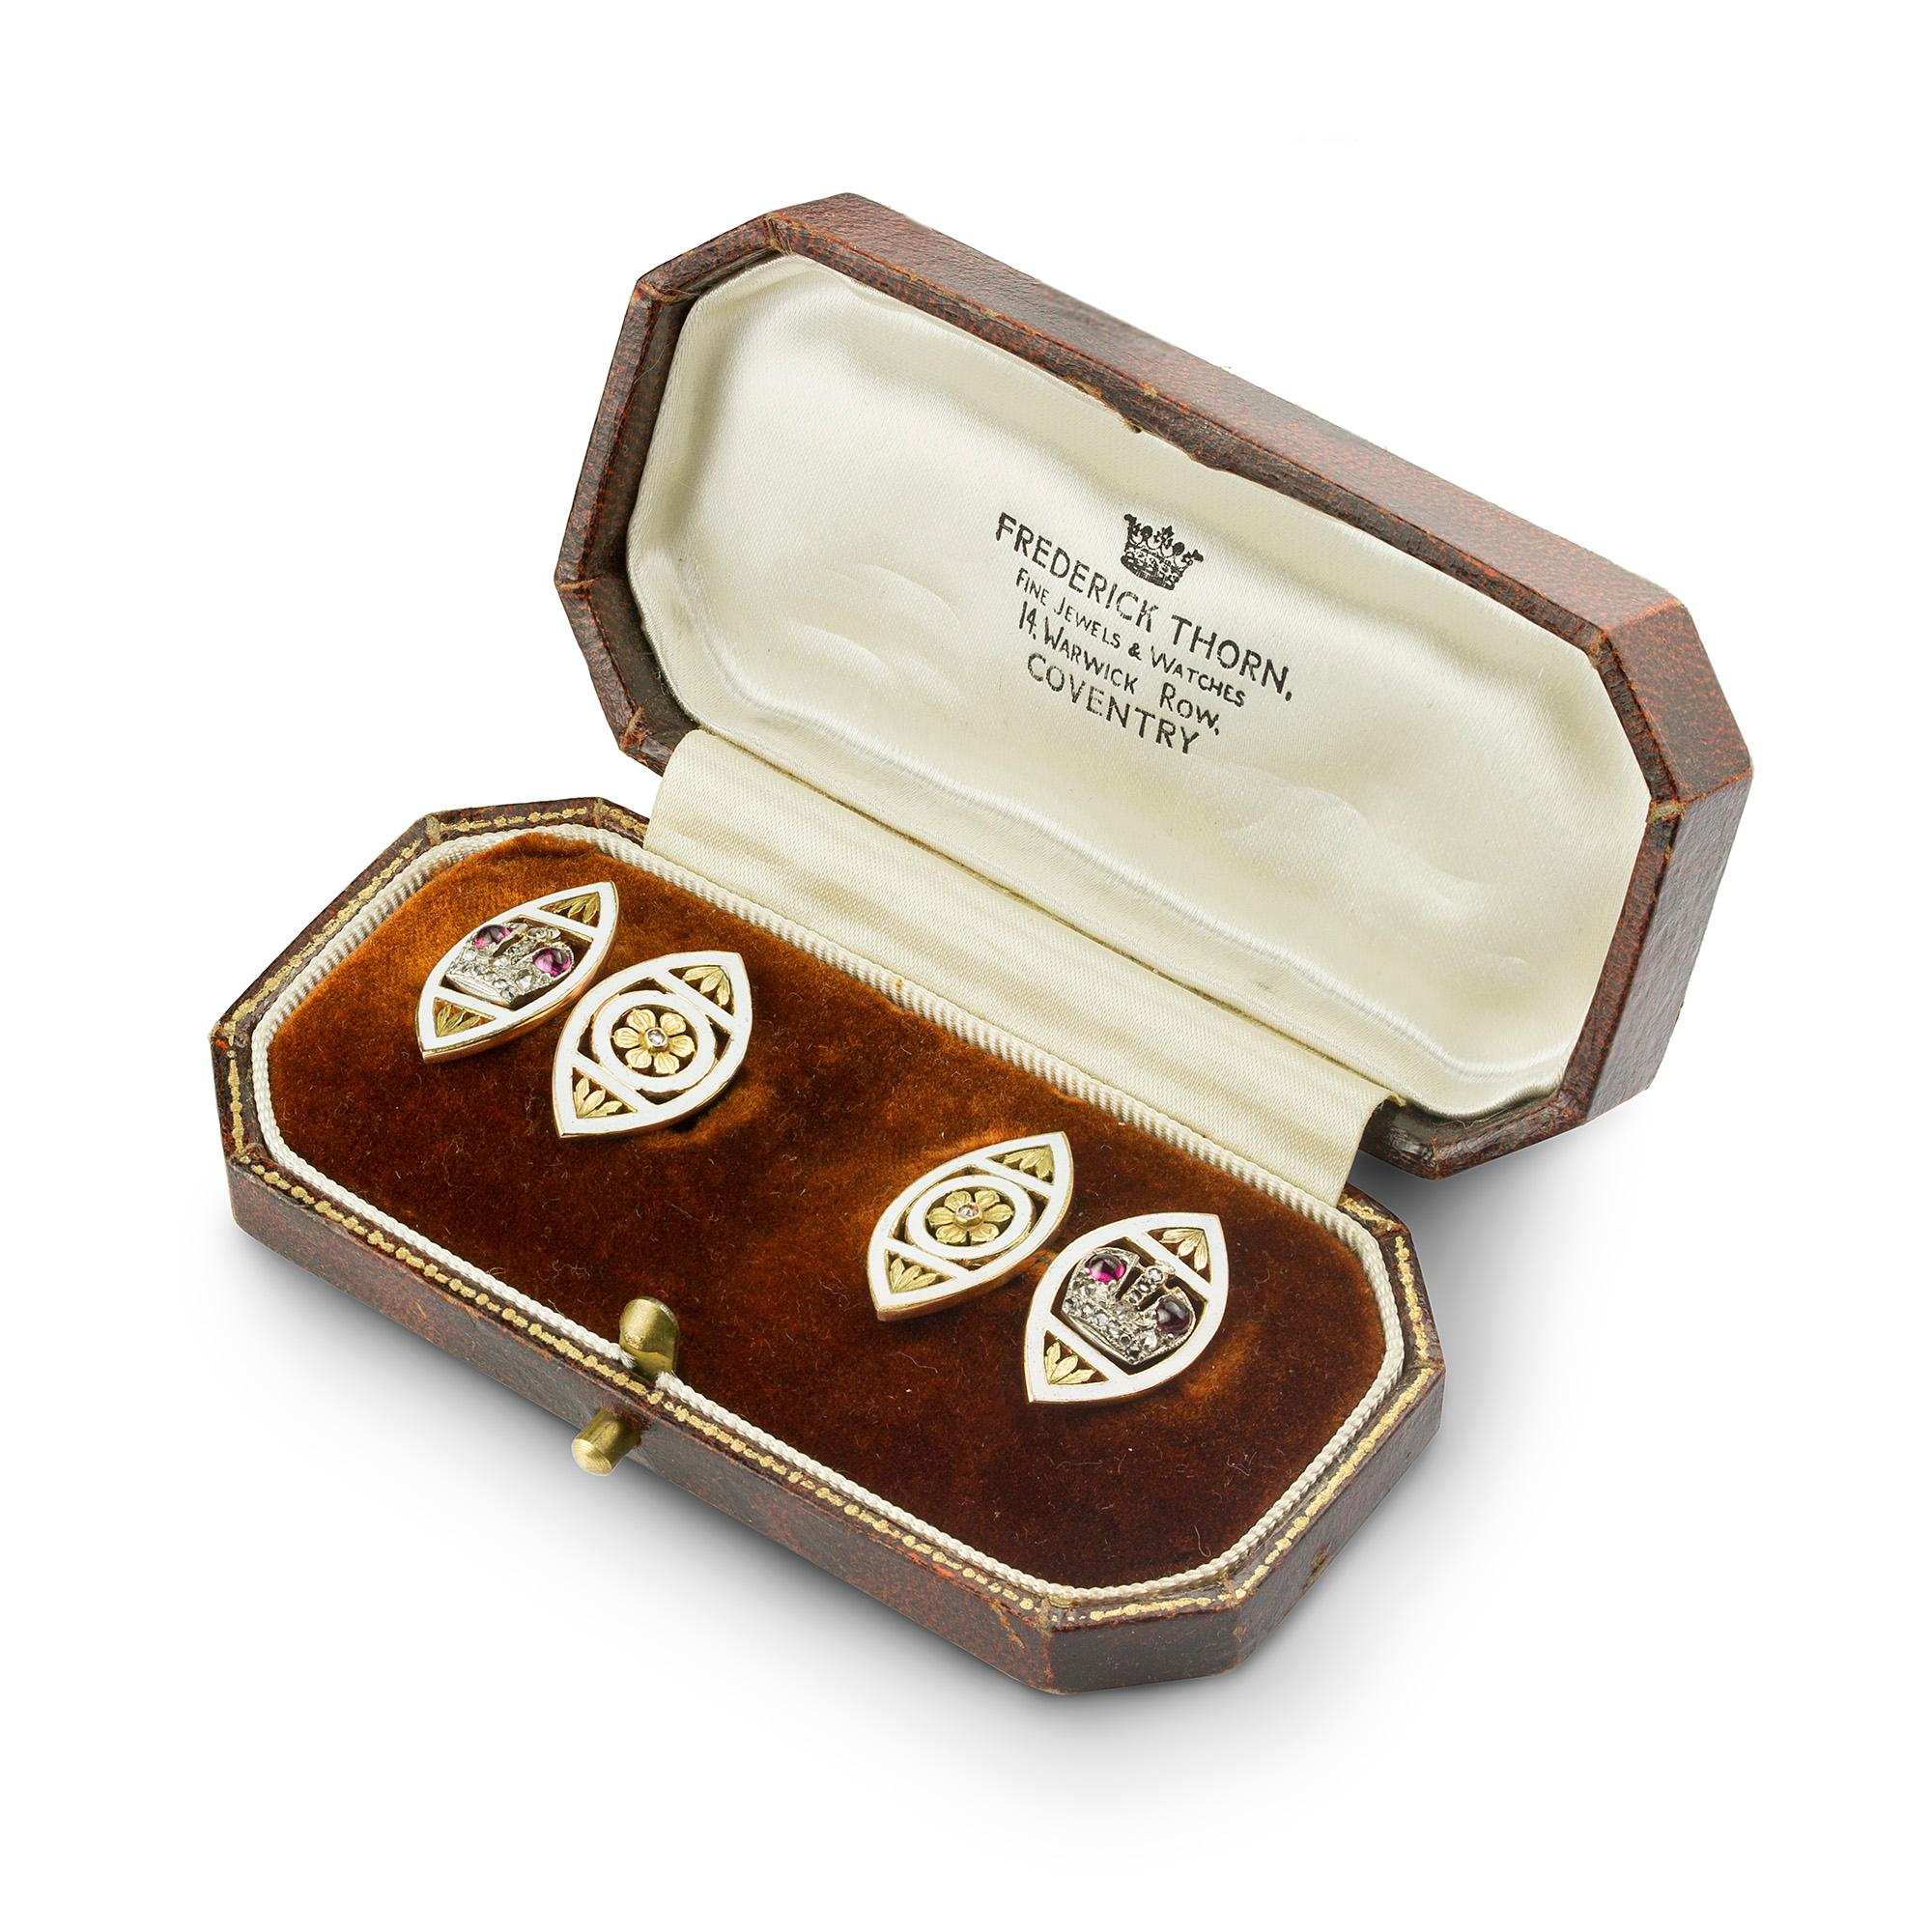 A pair of Faberge ruby and enamel cufflinks, each cufflink comprising two marquise-shaped plaques, one with the Russian Imperial crown set with cabochon rubies and rose-cut diamonds surrounded by white enamel linked by a gold chain to the other